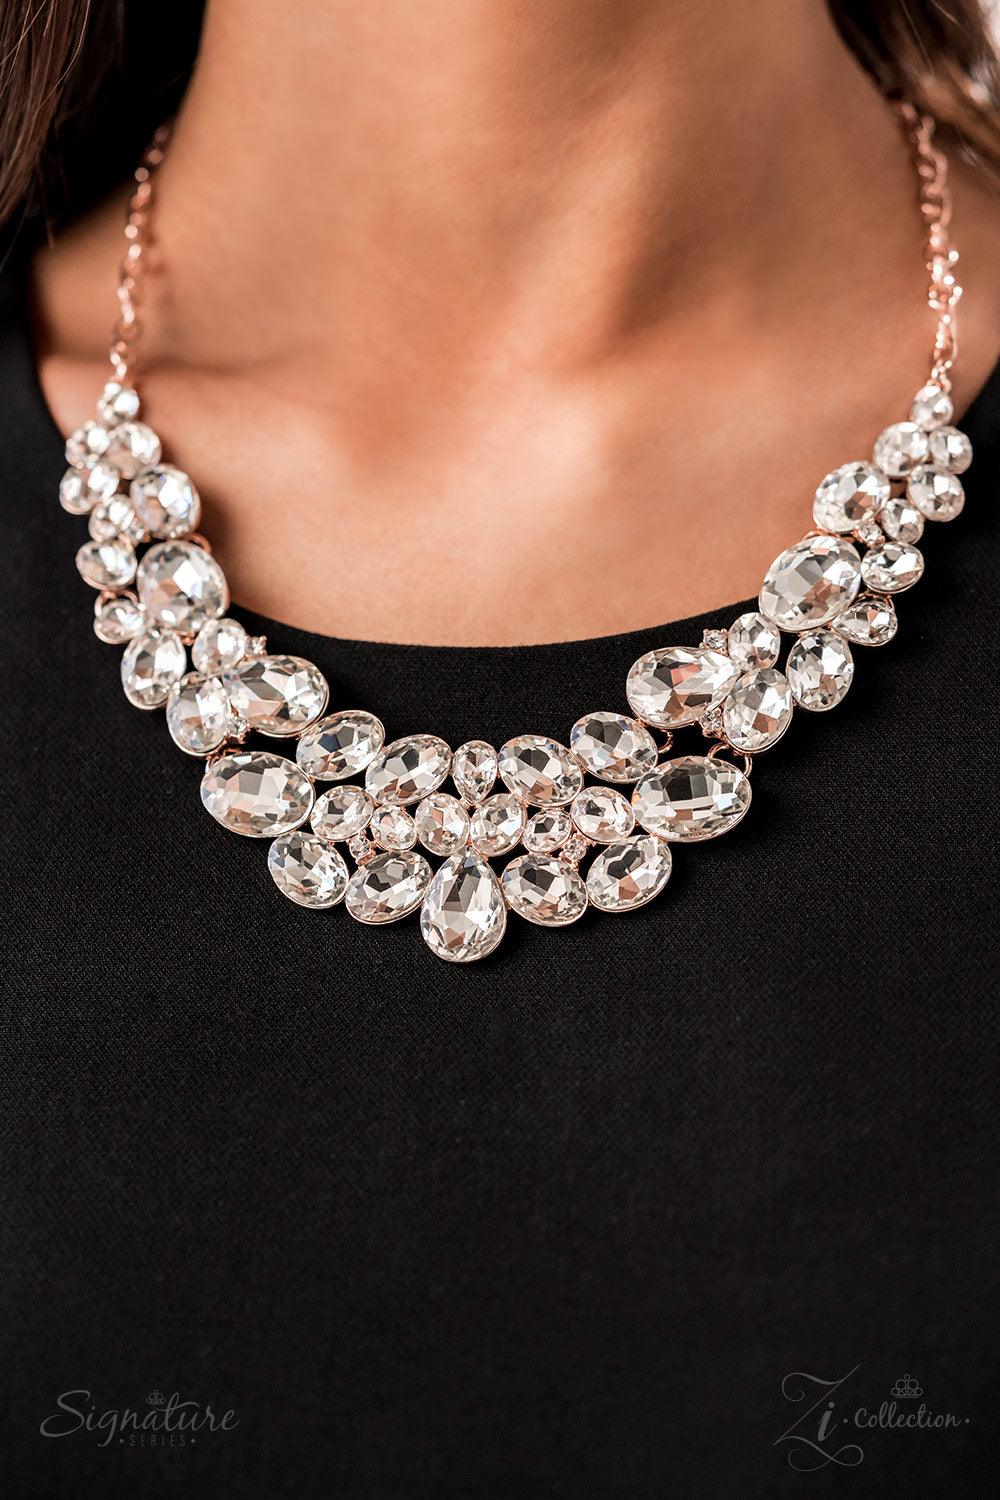 Paparazzi Accessories The Jenni Oversized white rhinestones with exaggerated faceted surfaces gather into glittery clusters along the collar. A teardrop-shaped gem sits front-and-center, inviting the eye to explore the scattered shapes throughout the desi